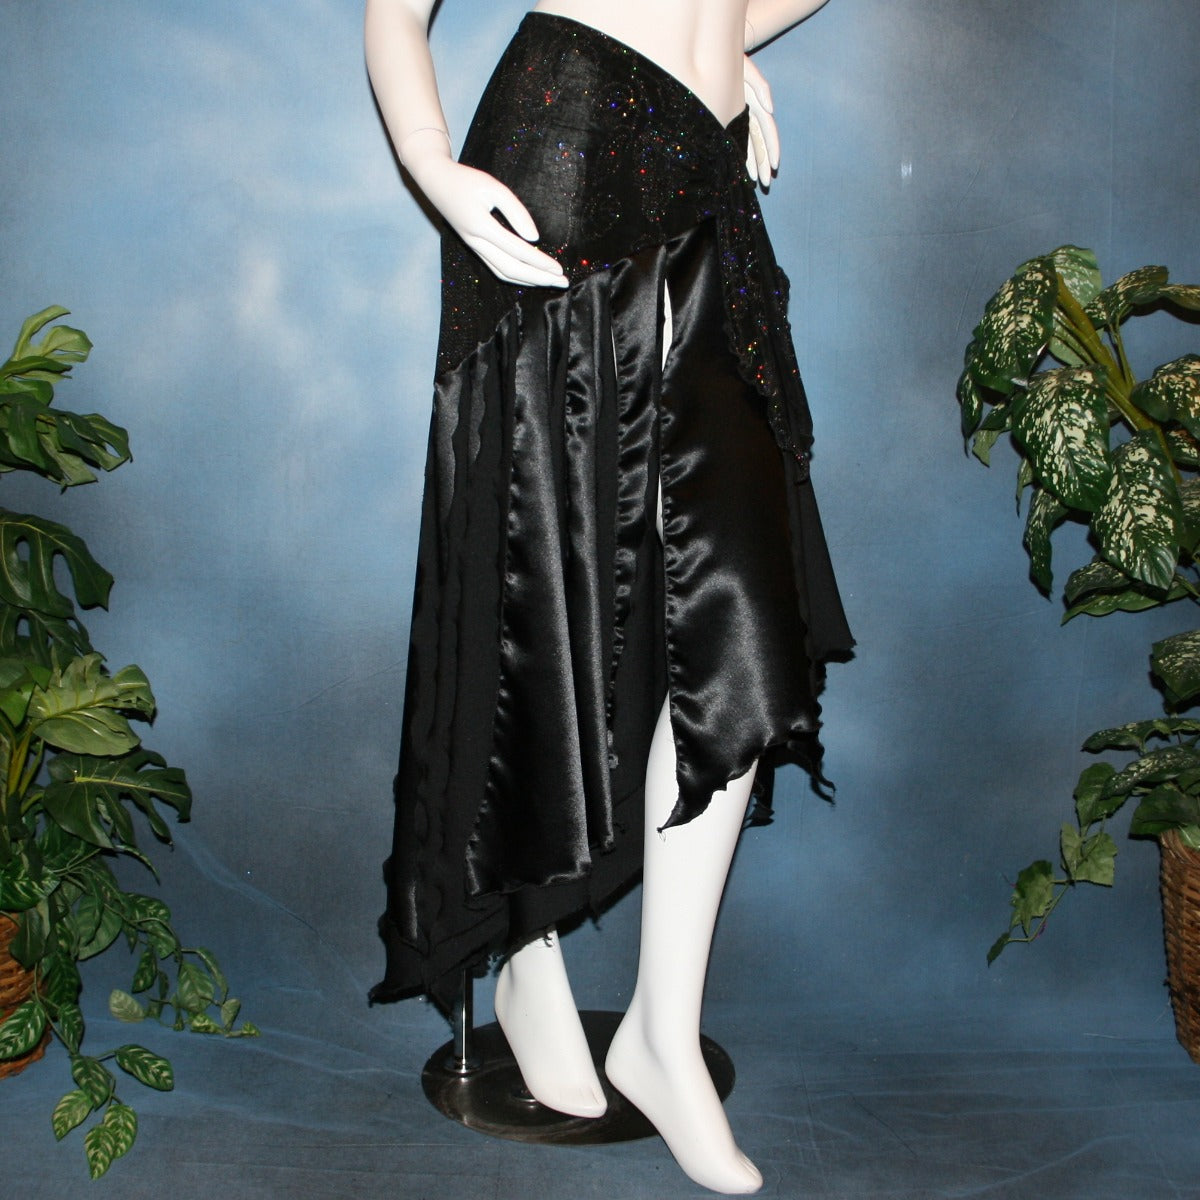 Crystal's Creations Black ballroom skirt created with a beautifully patterned glitter slinky sarong hip sash piece that flairs out to yards of black satin panels, would pair beautifully with a black body suit or one could be custom created for an extra fee.